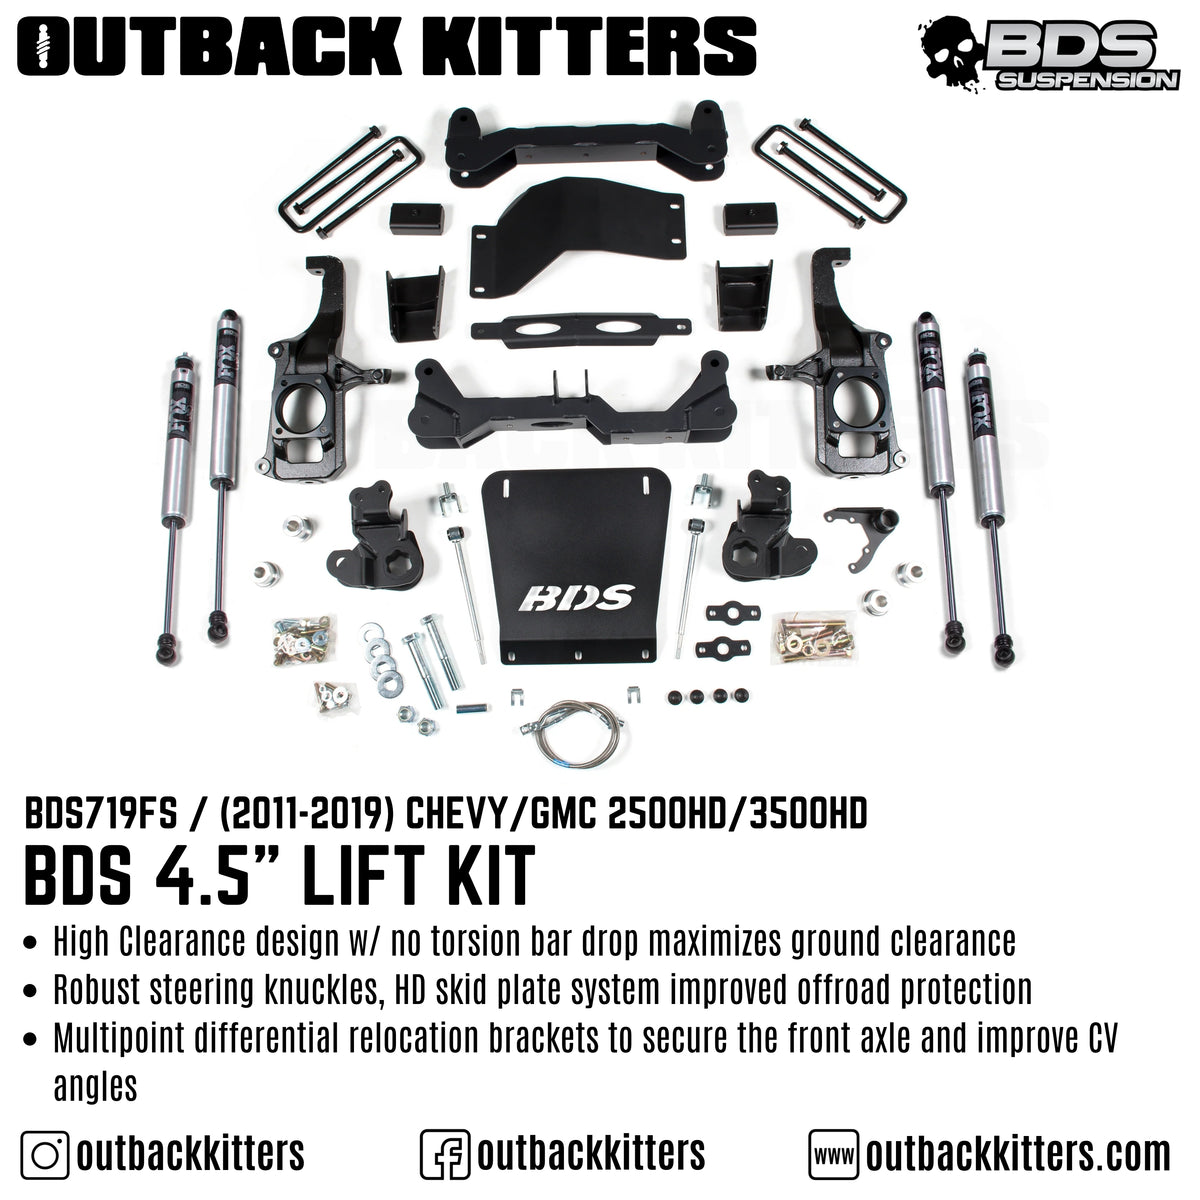 BDS Suspension 4.5" Lift Kit for 2011-2019 Chevy Silverado 2500 with Fox Shocks - Outback Kitters